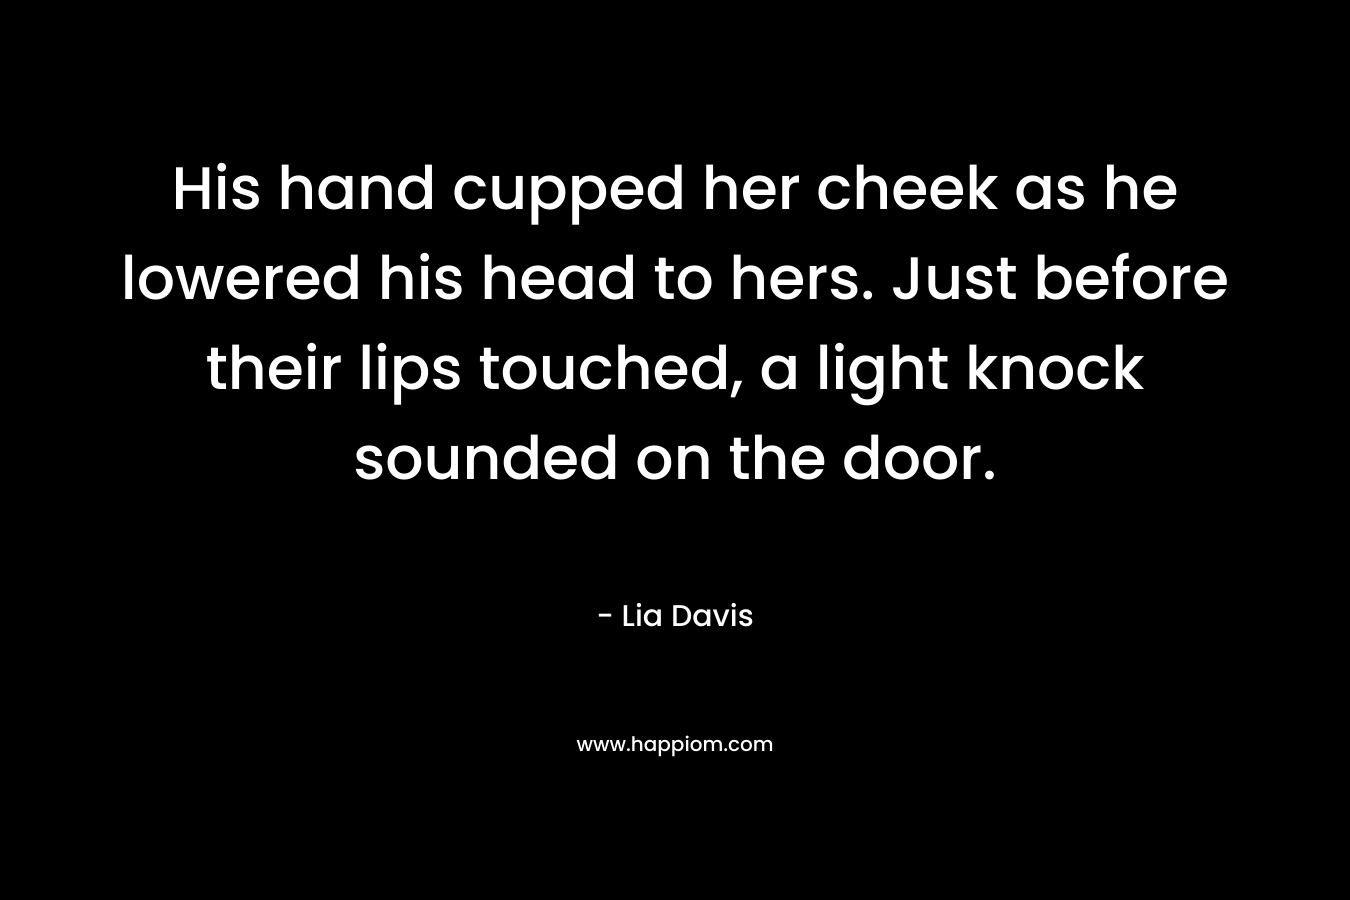 His hand cupped her cheek as he lowered his head to hers. Just before their lips touched, a light knock sounded on the door. – Lia Davis